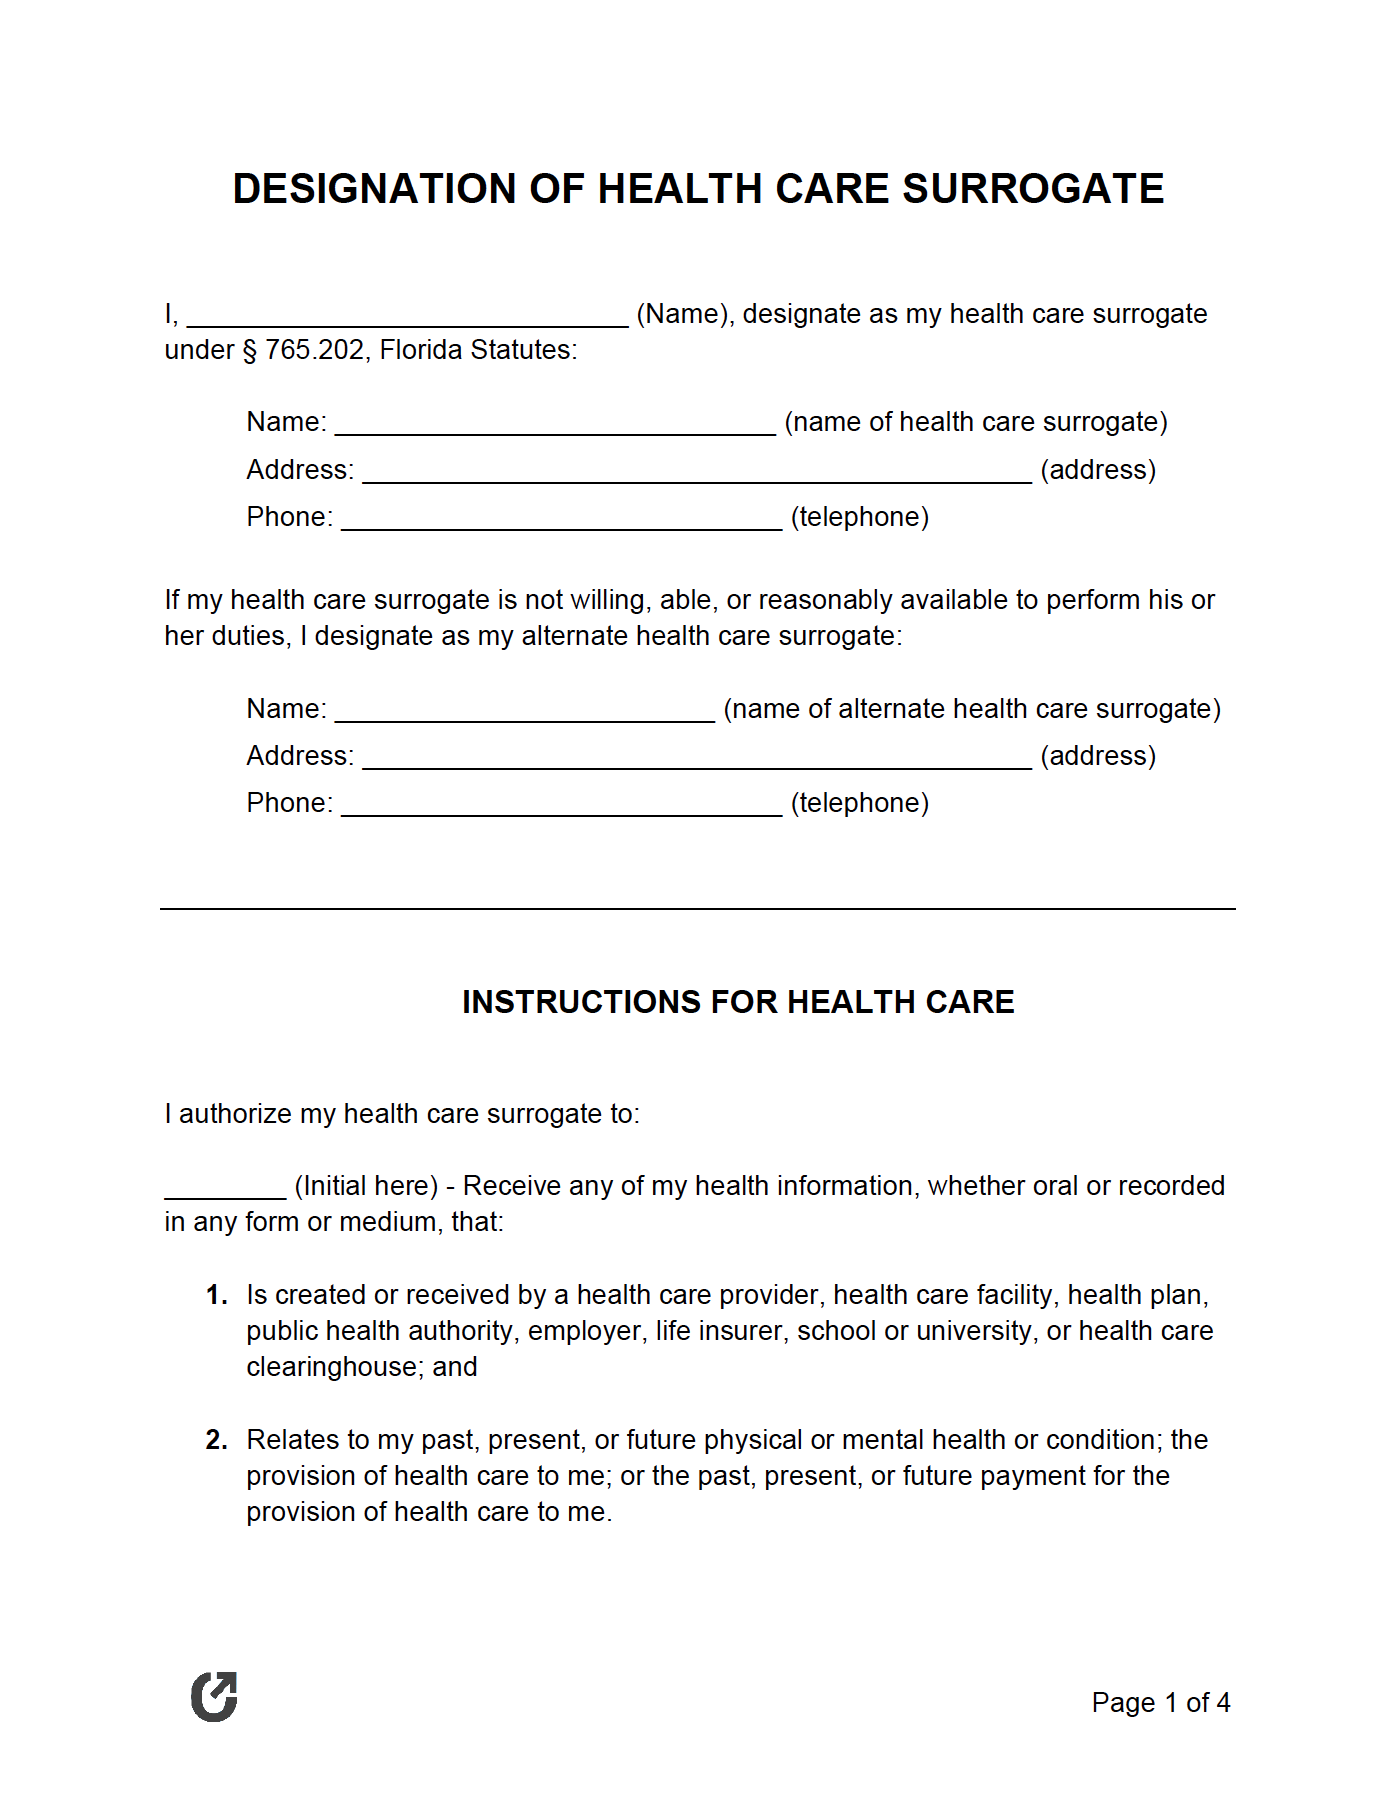 Does A Health Care Surrogate Form Need To Be Notarized